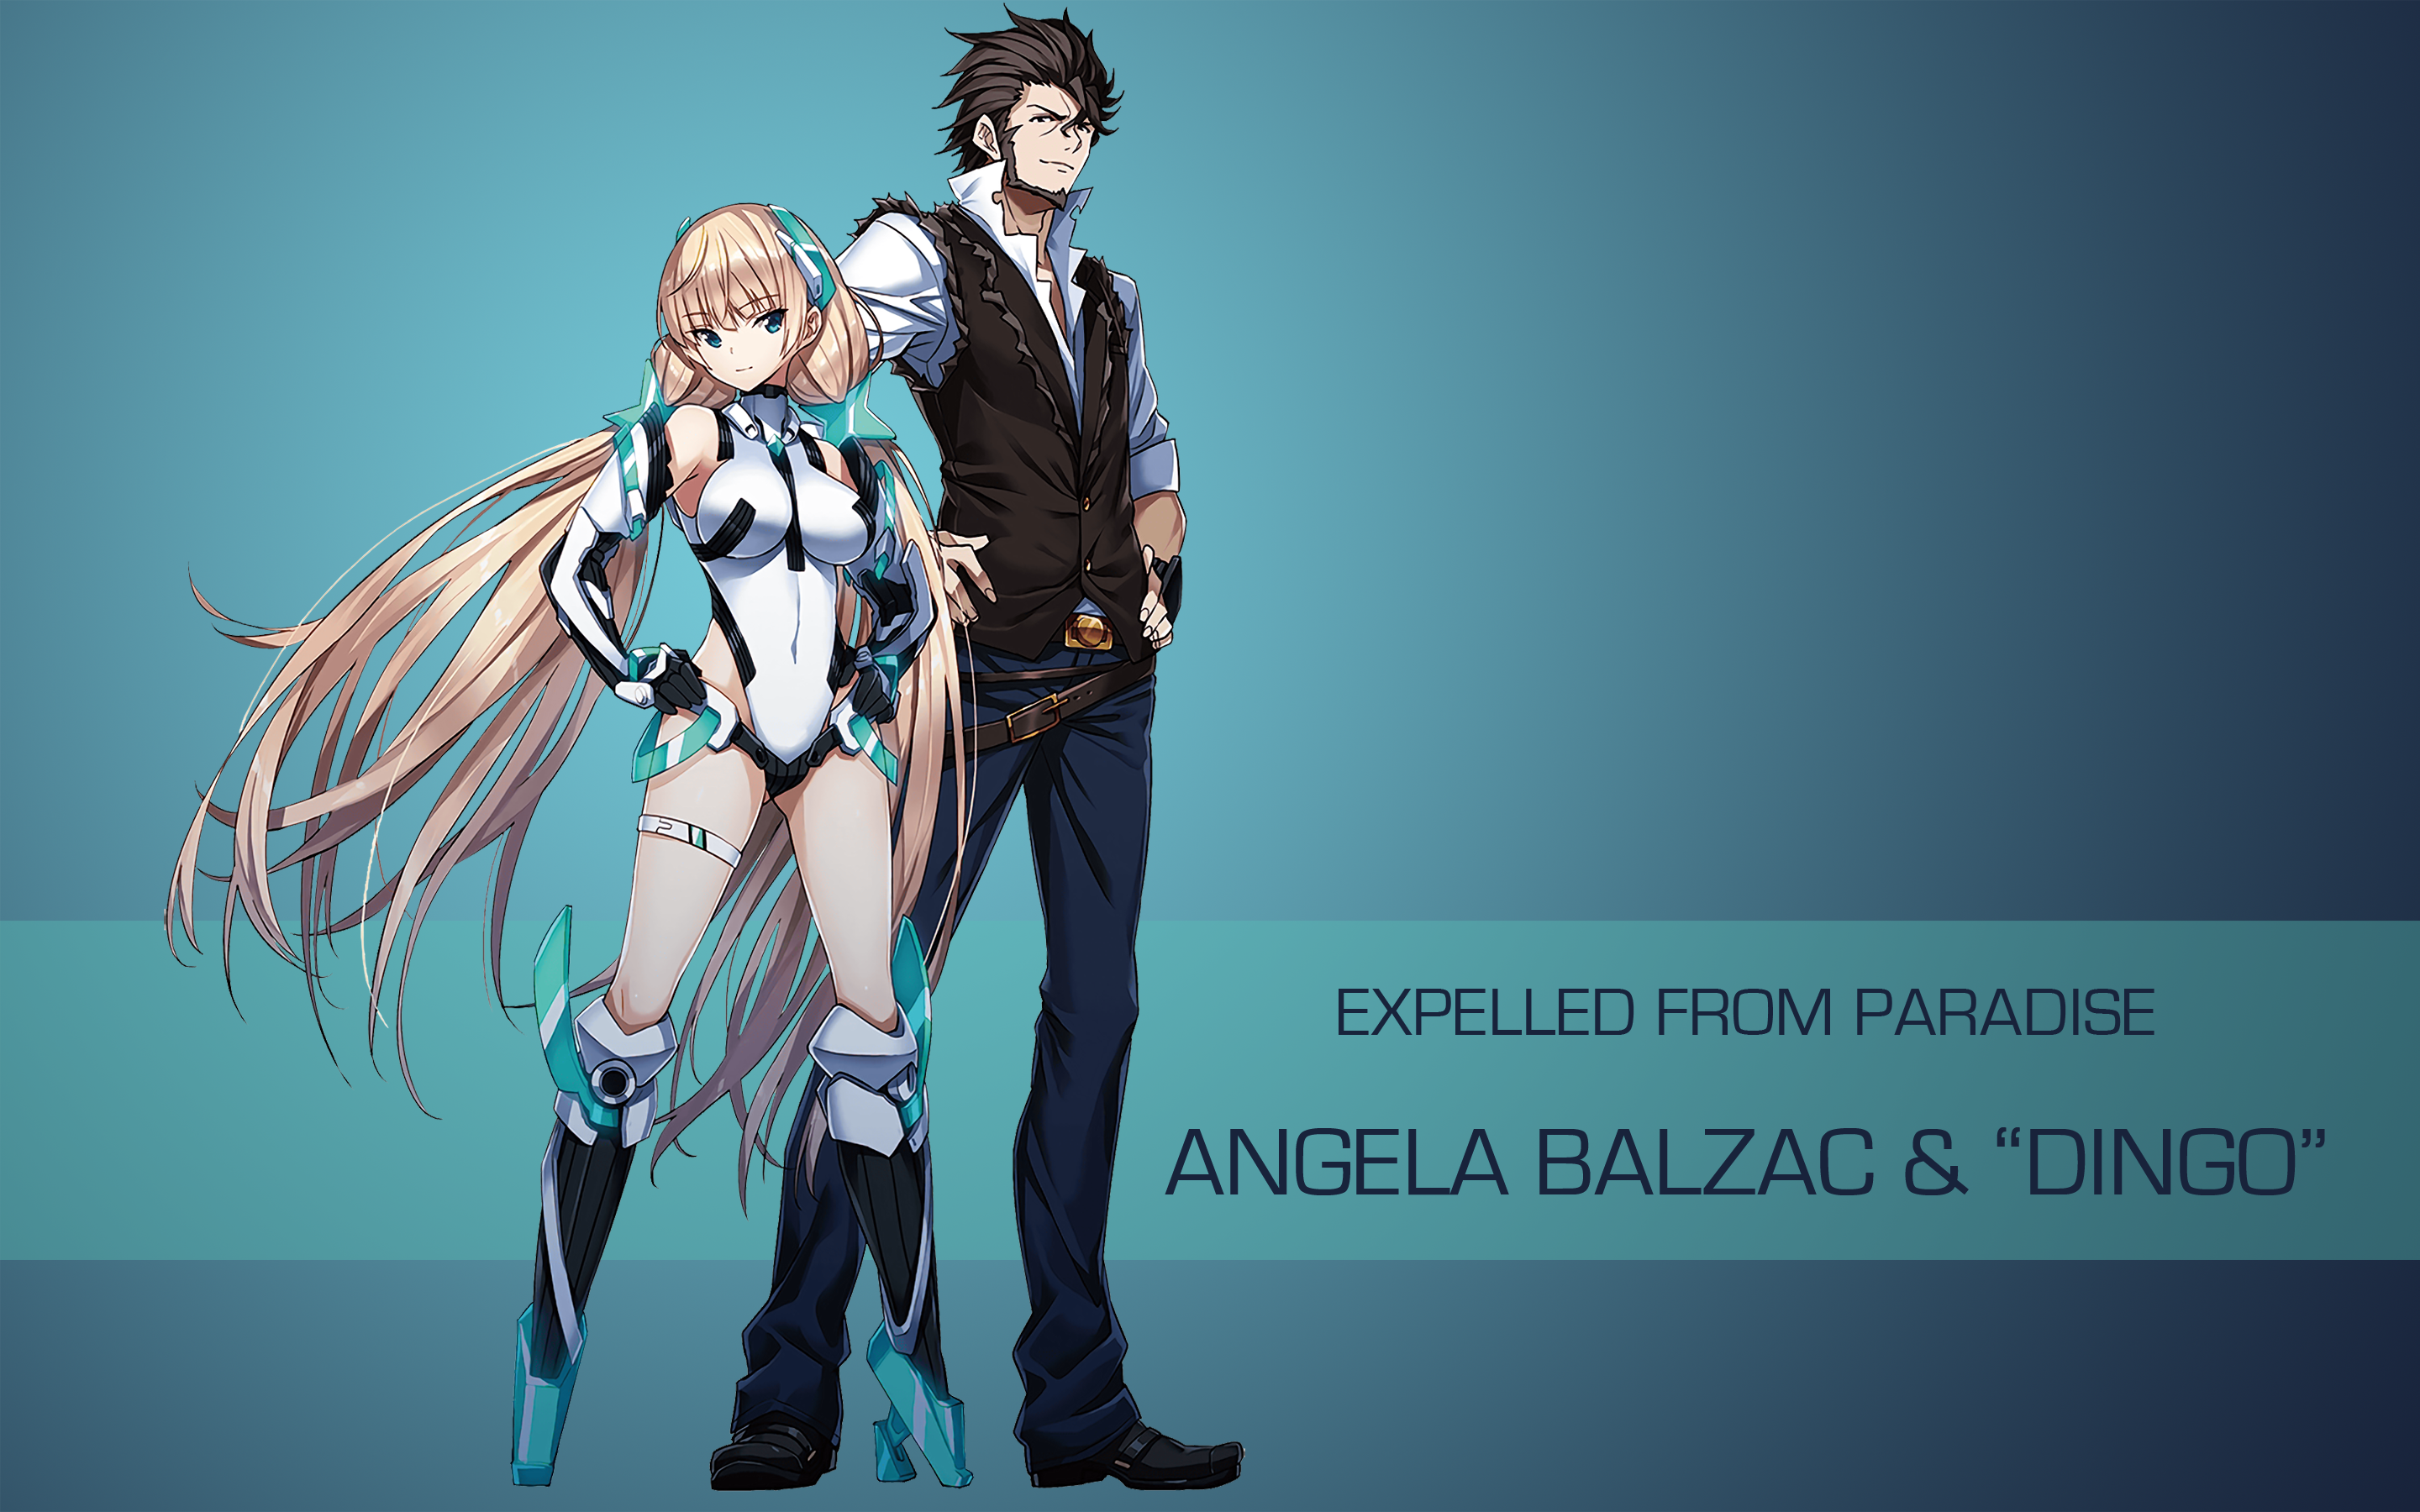 Anime Expelled From Paradise HD Wallpaper by spectralfire234